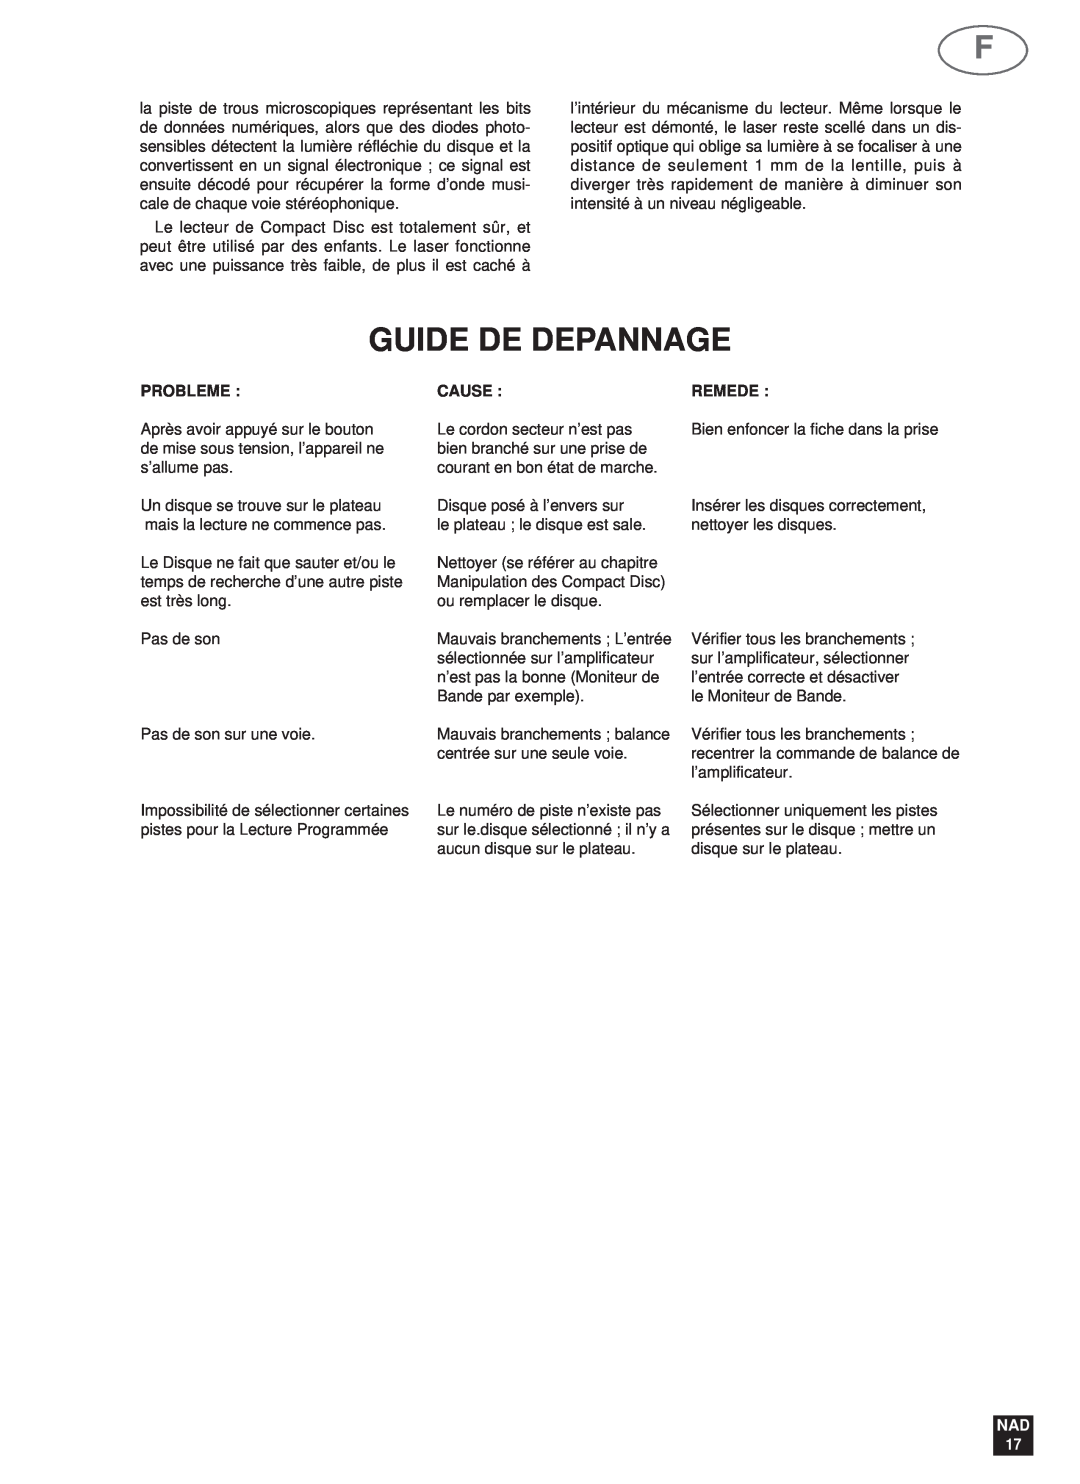 NAD 523 owner manual Guide De Depannage, Probleme, Cause, Remede, NAD 17 